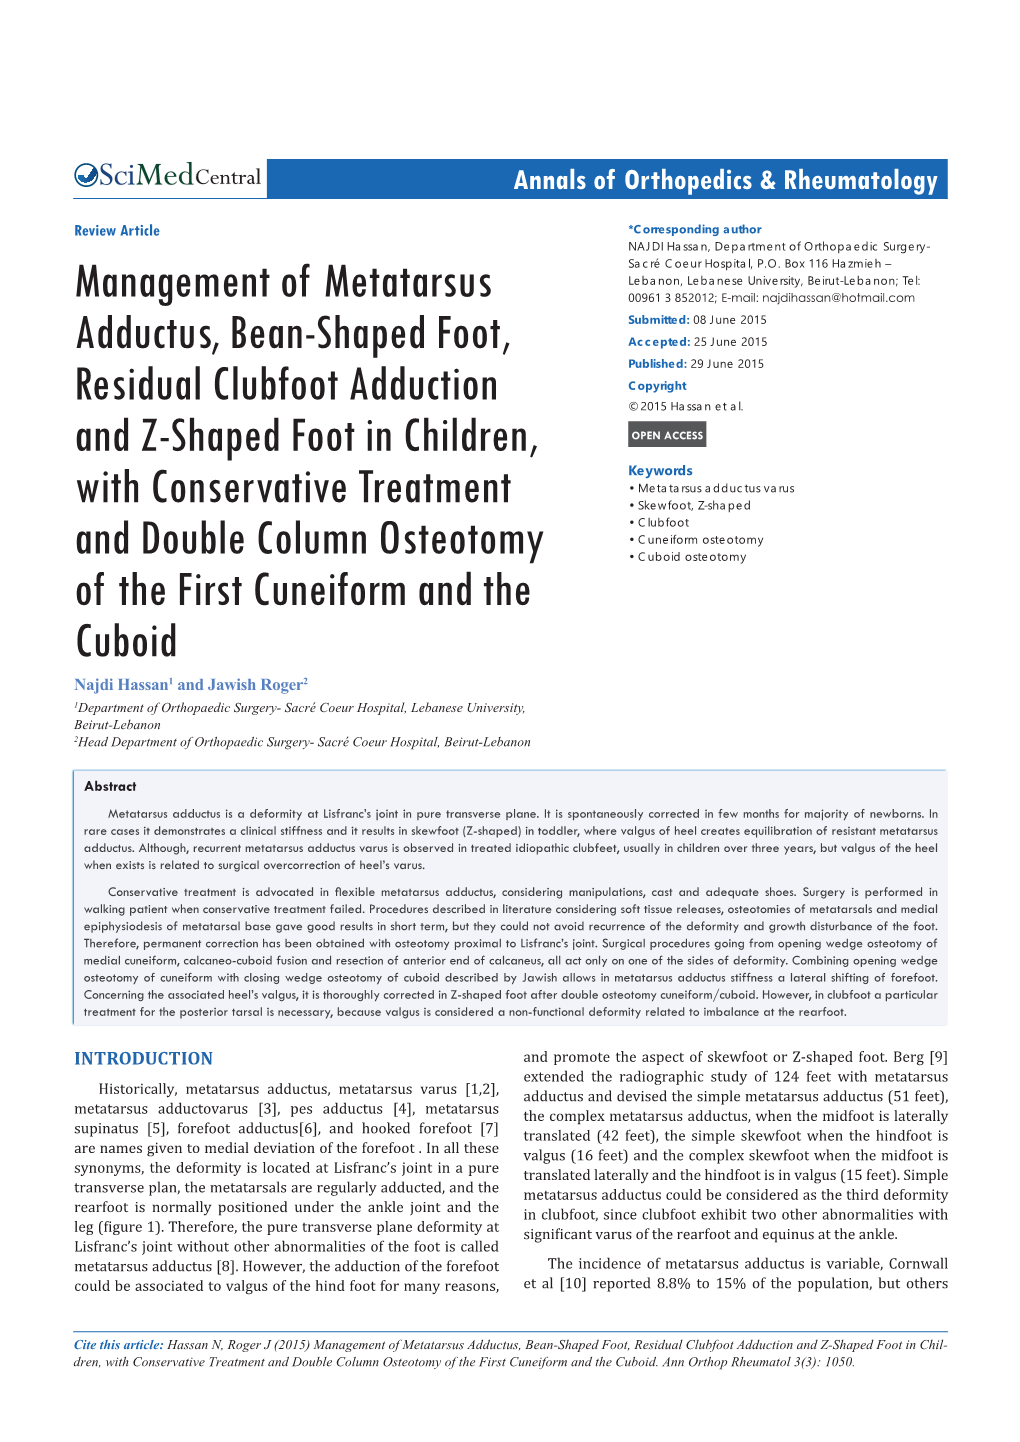 Management of Metatarsus Adductus, Bean-Shaped Foot, Residual Clubfoot Adduction and Z-Shaped Foot in Children, with Conservativ